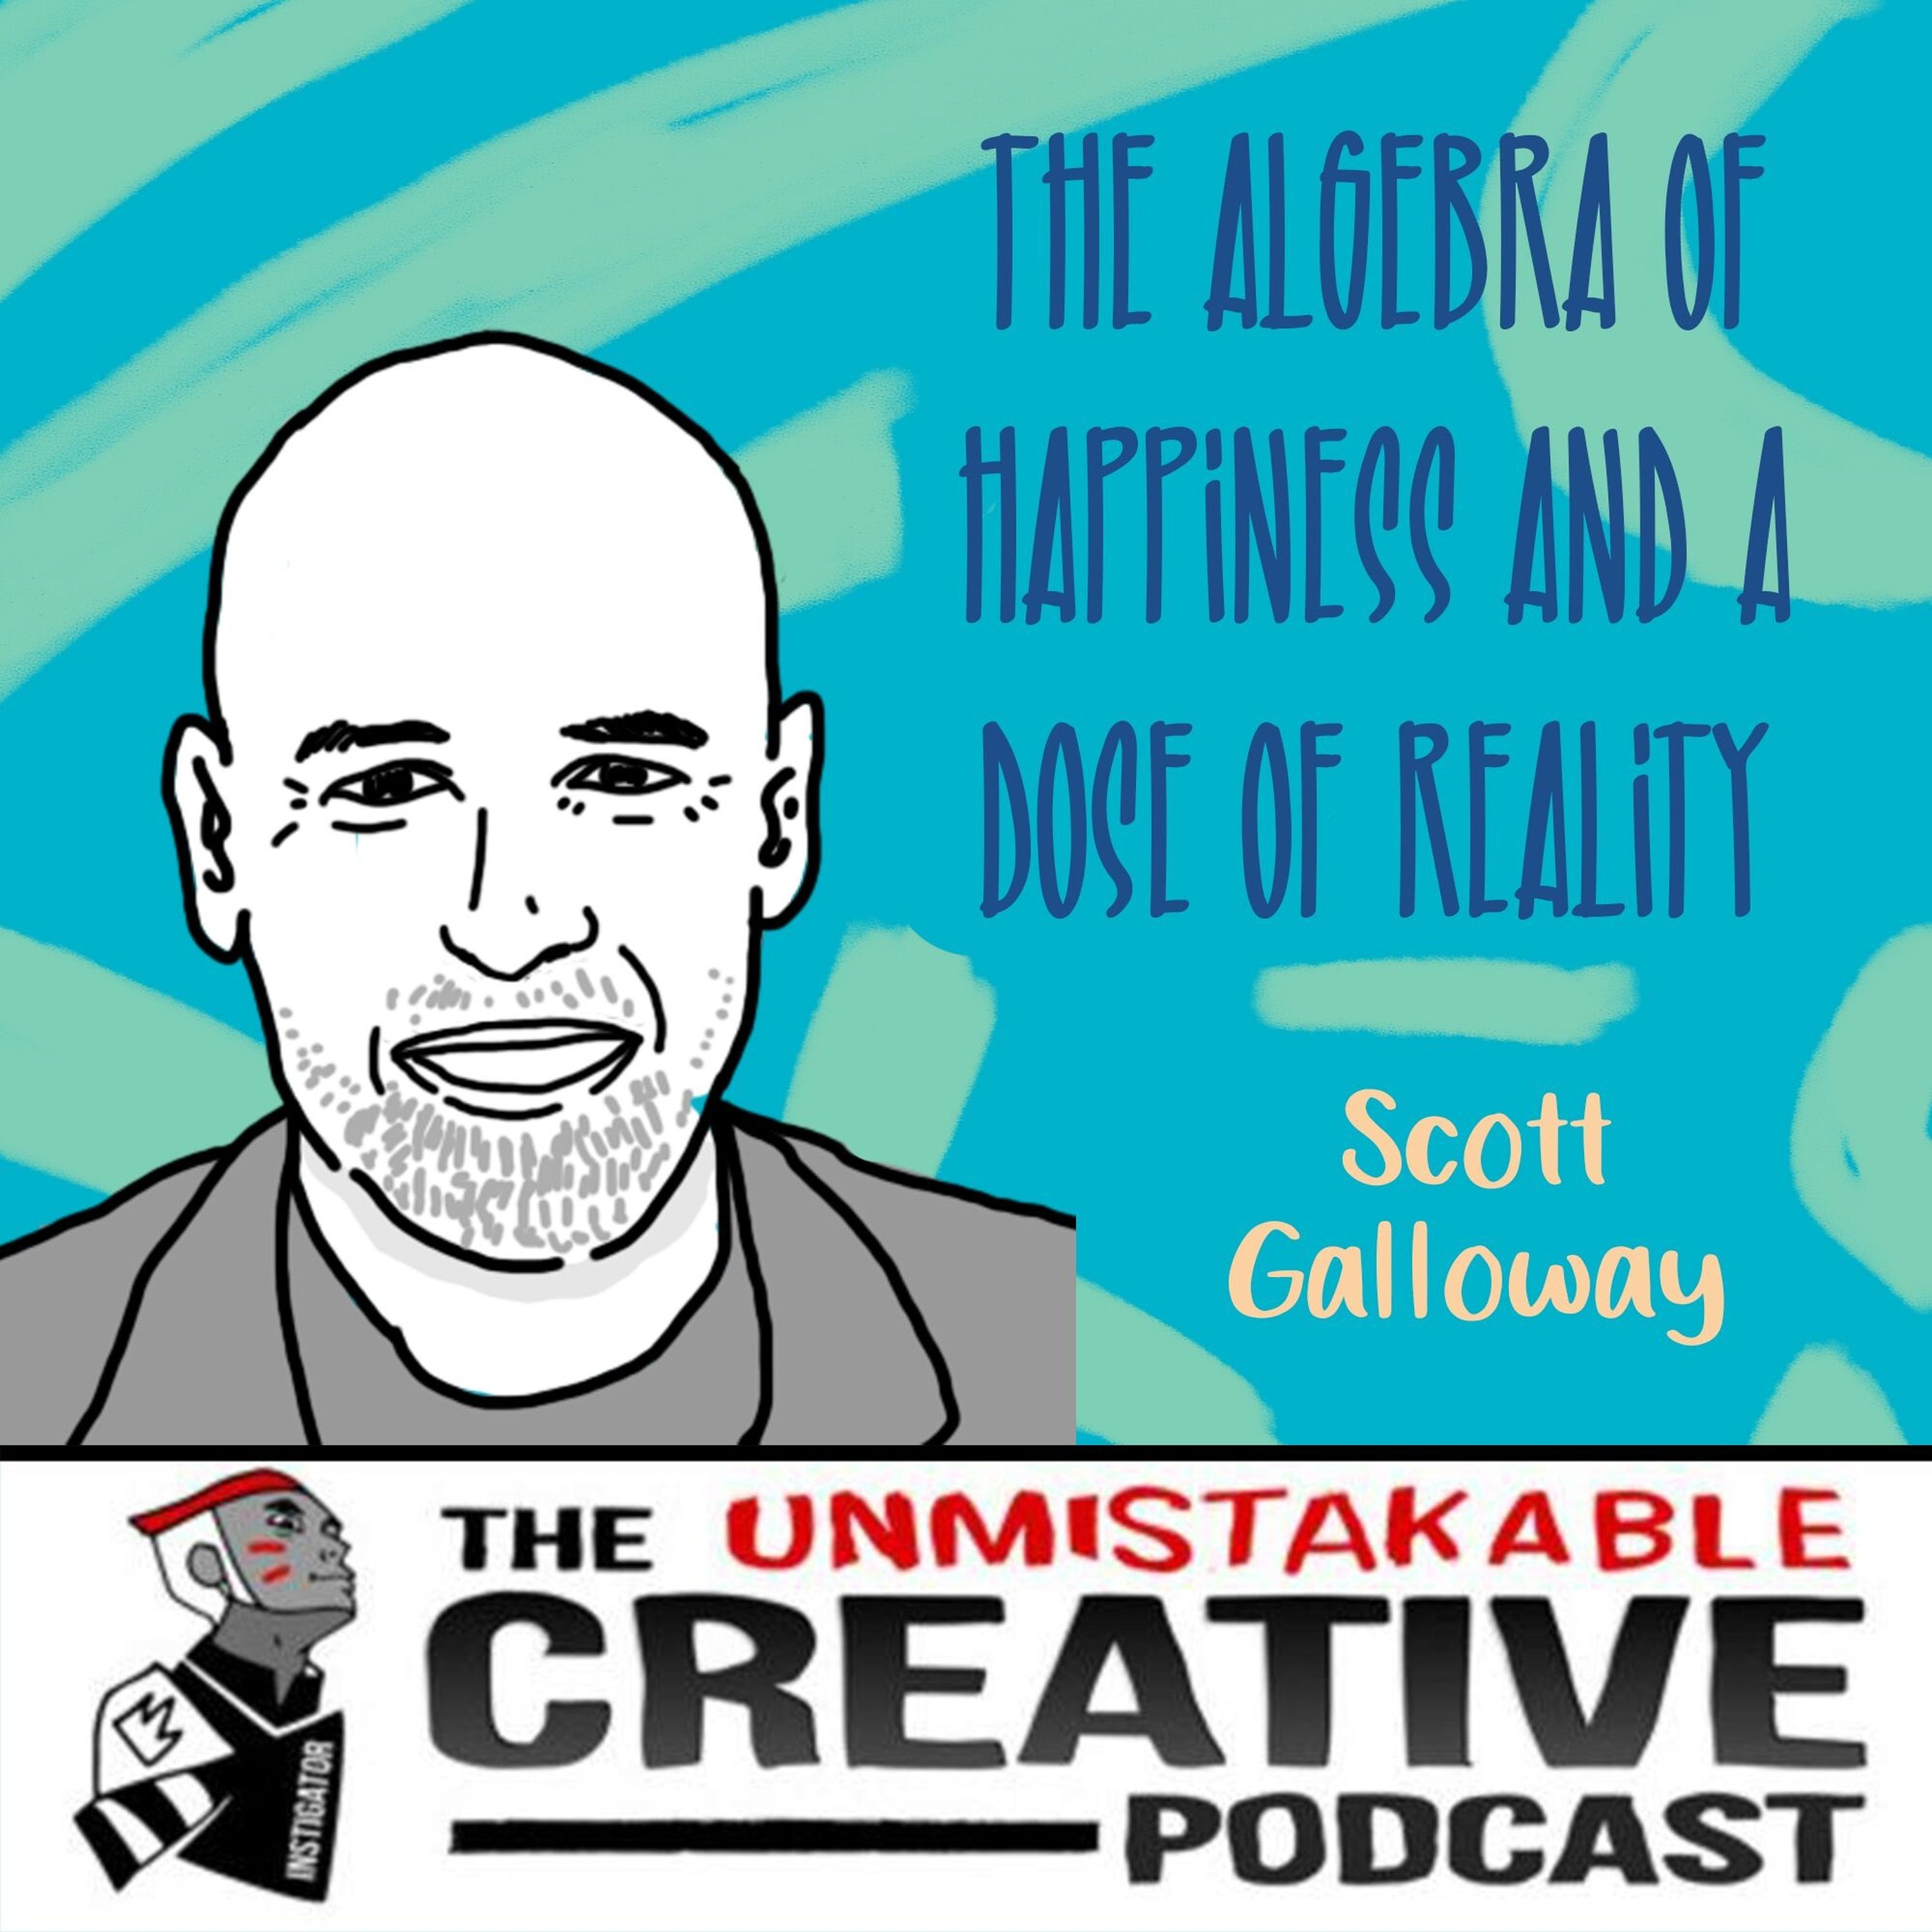 Best of 2019: Scott Galloway: The Algebra of Happiness and a Dose of Reality